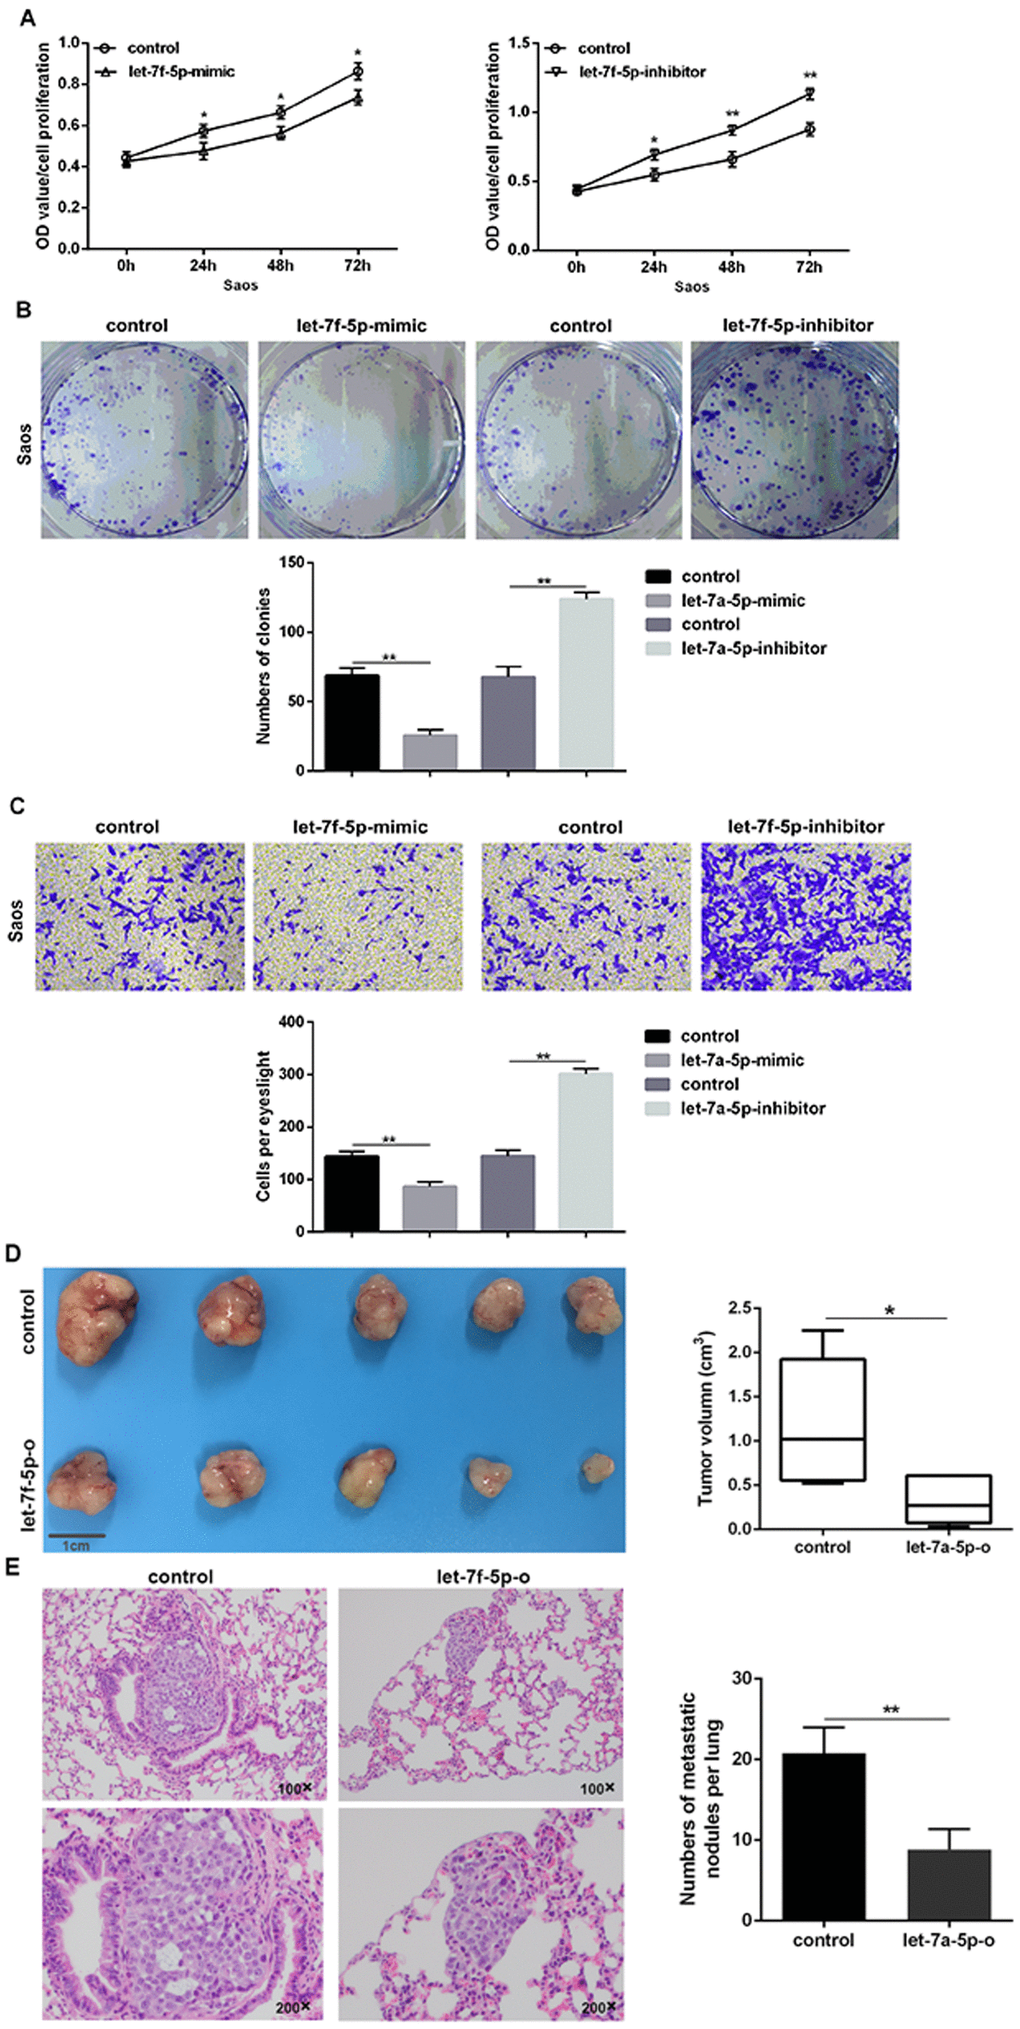 let-7f-5p suppressed proliferation and invasion of Saos cells in vitro and in vivo. (A) The CCK8 assay results showed that let-7f-5p suppressed the proliferation of Saos cells in vitro. (B) The colony formation assay results showed that let-7f-5p suppressed the clonality of Saos cells in vitro. (C) The Transwell assay results showed that let-7f-5p suppressed the invasion of Saos cells in vitro. (D) Representative graphs and statistical results of tumor masses harvested 4 weeks after injecting Saos cells subcutaneously into nude mice. (E) Representative photographs of lung metastases and statistical results of lung metastatic nodule numbers between the Saos-let-7f-5p-o and Saos-control groups 6 weeks after injecting Saos cells into the lateral tail veins of nude mice (magnification: 100× and 200×).